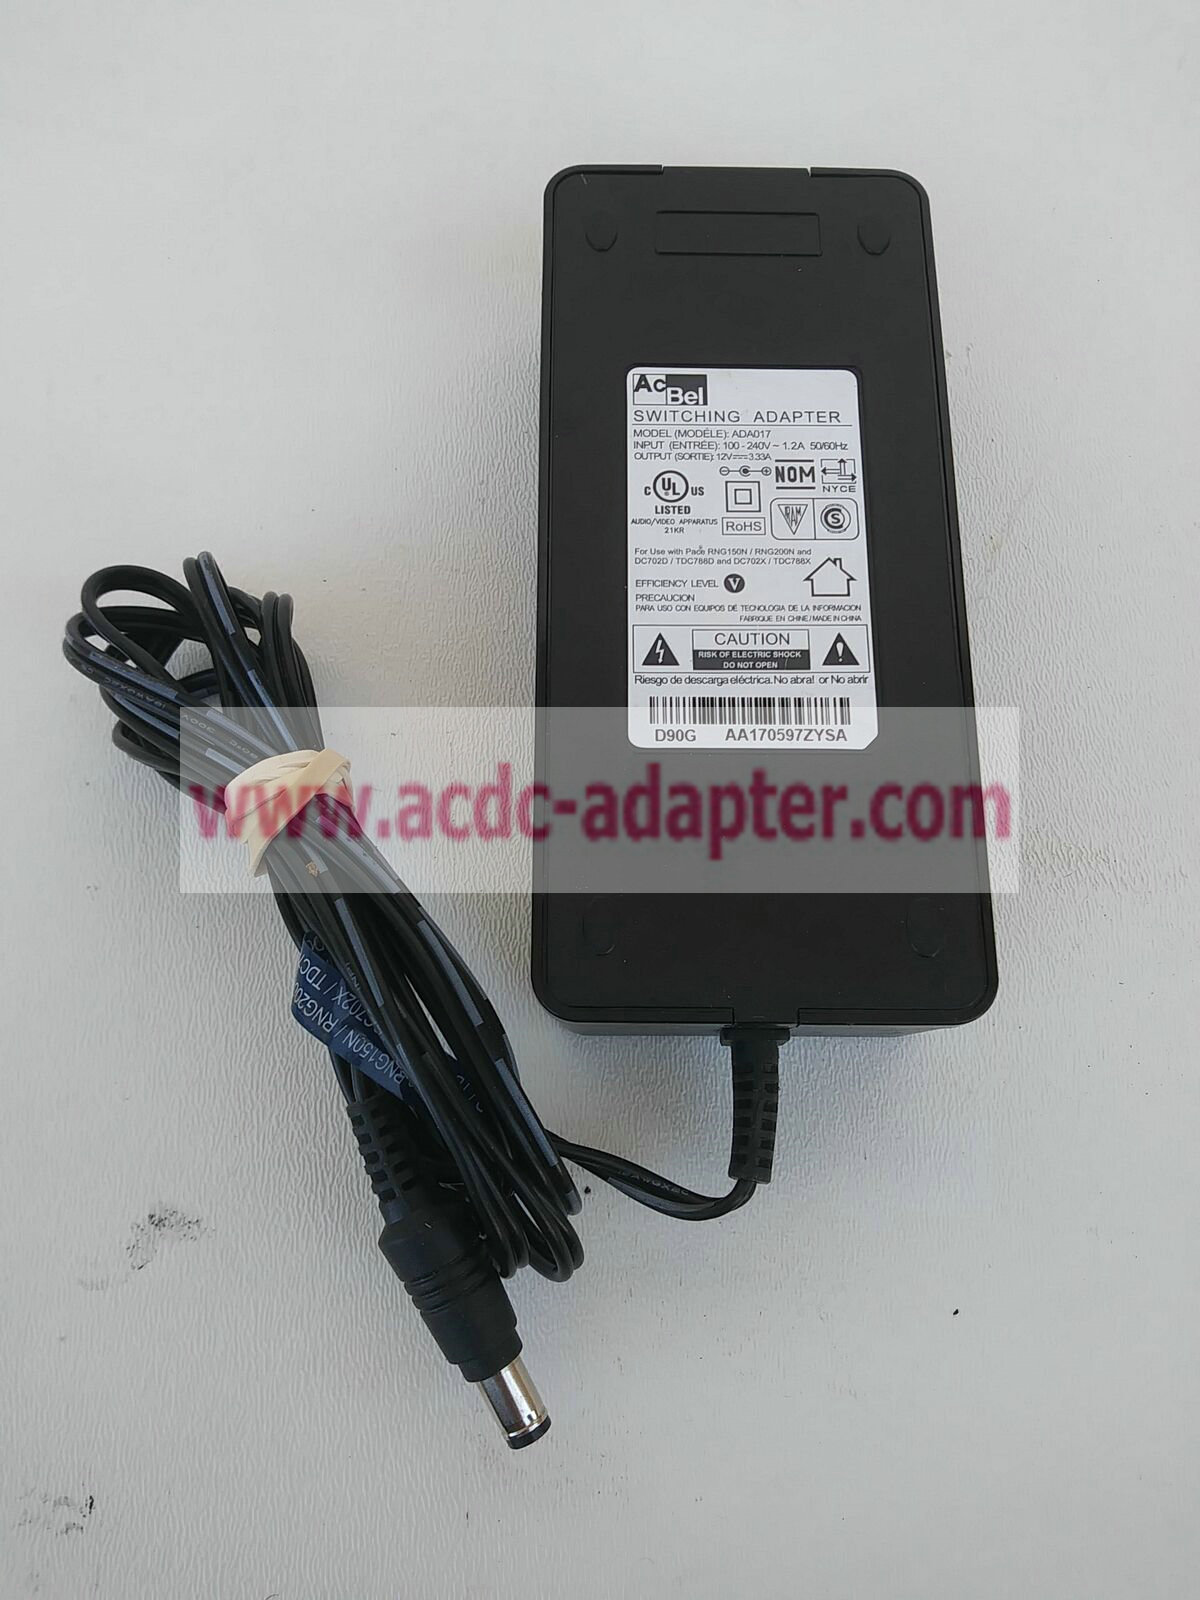 New AcBel ADA017 12V 3.33A Switching Adapter Power Supply